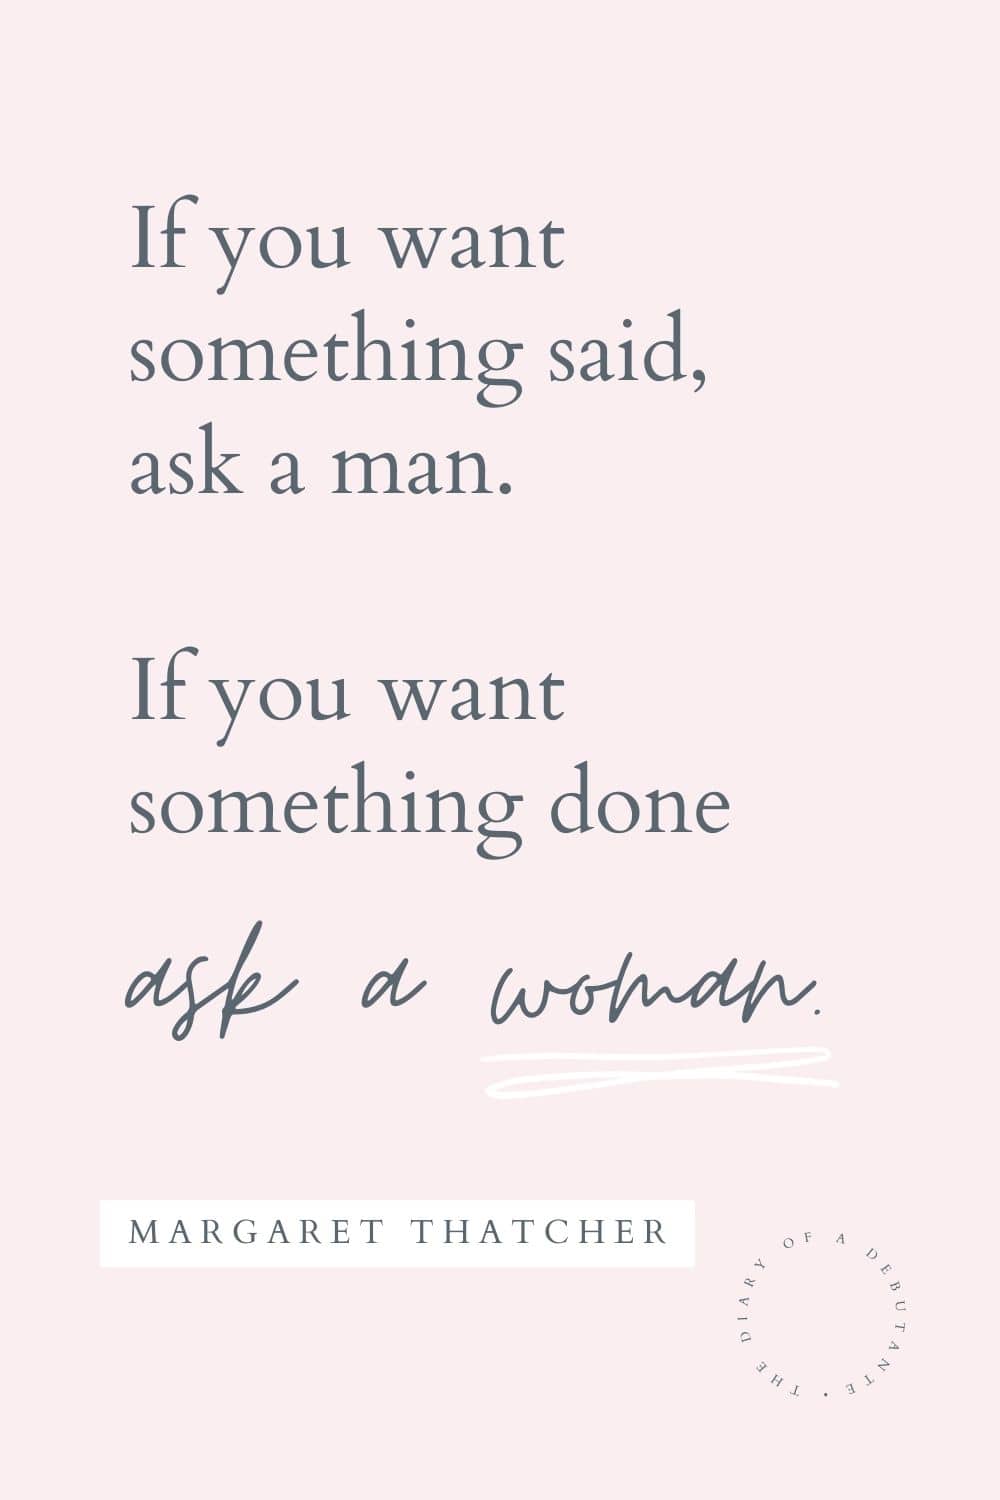 Ask a woman quote from Margaret Thatcher curated as part of a collection of inspirational words for women by blogger Stephanie Ziajka on Diary of a Debutante